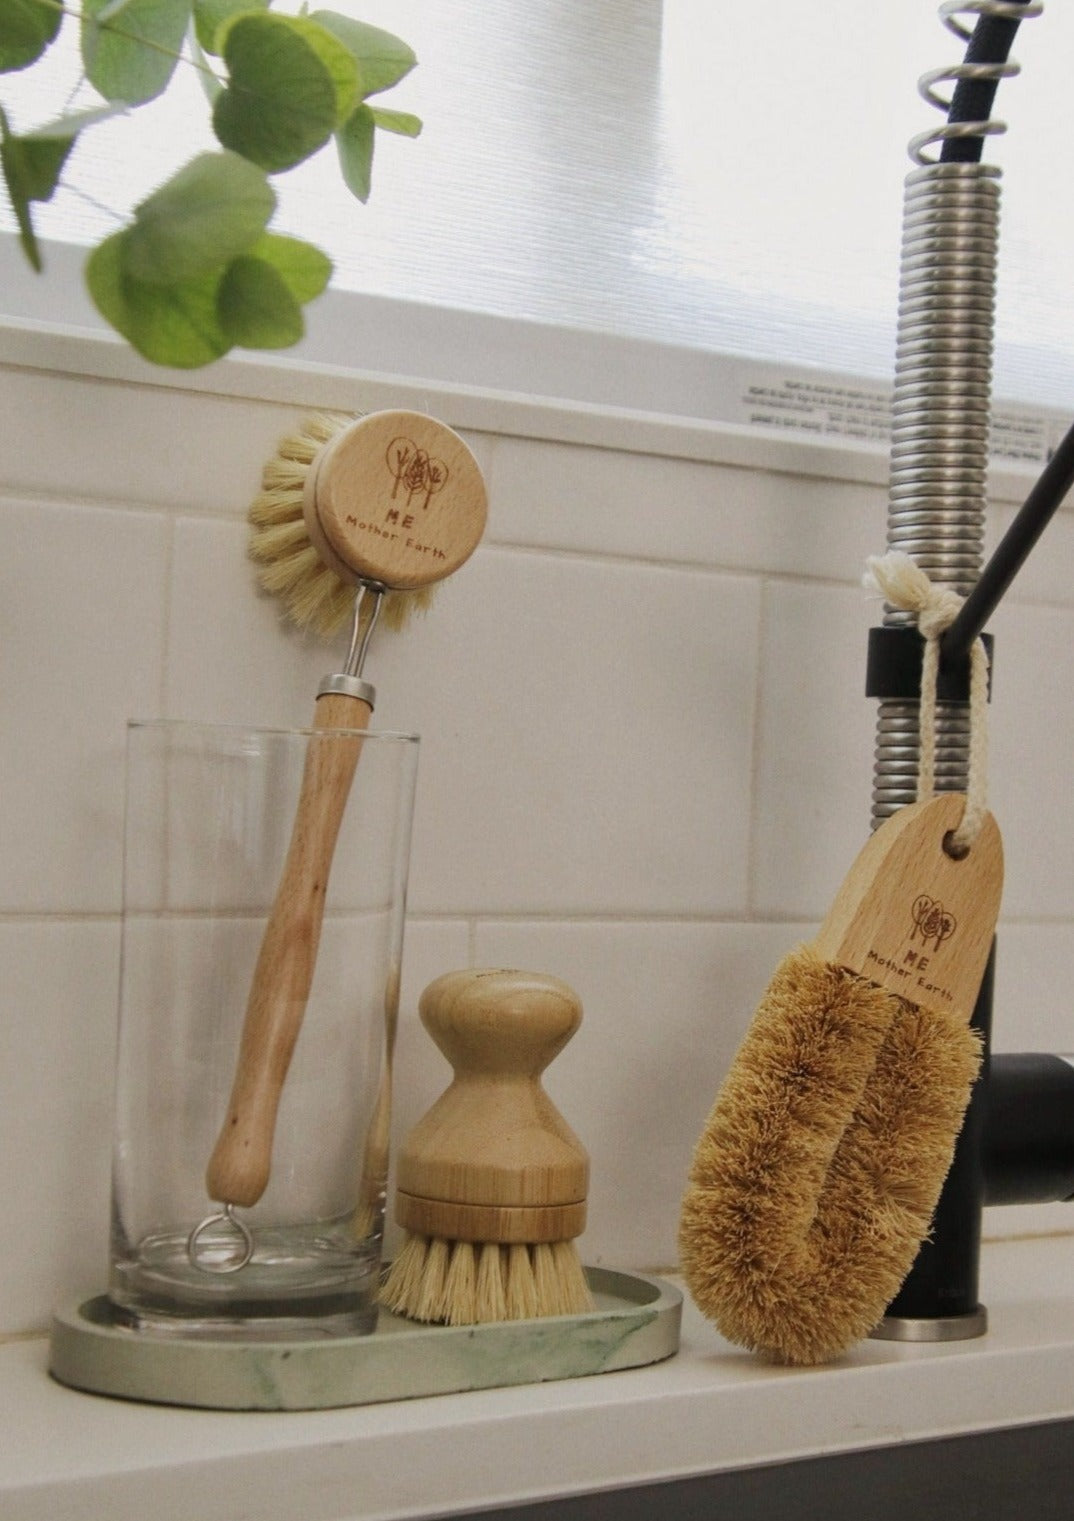 4 Packs Bamboo Palm Scrub Brush Sisal Dish Brush Round Natural Dish Scrubber for Cast Iron Pots, Pans, Kitchen Sink and Vegetable